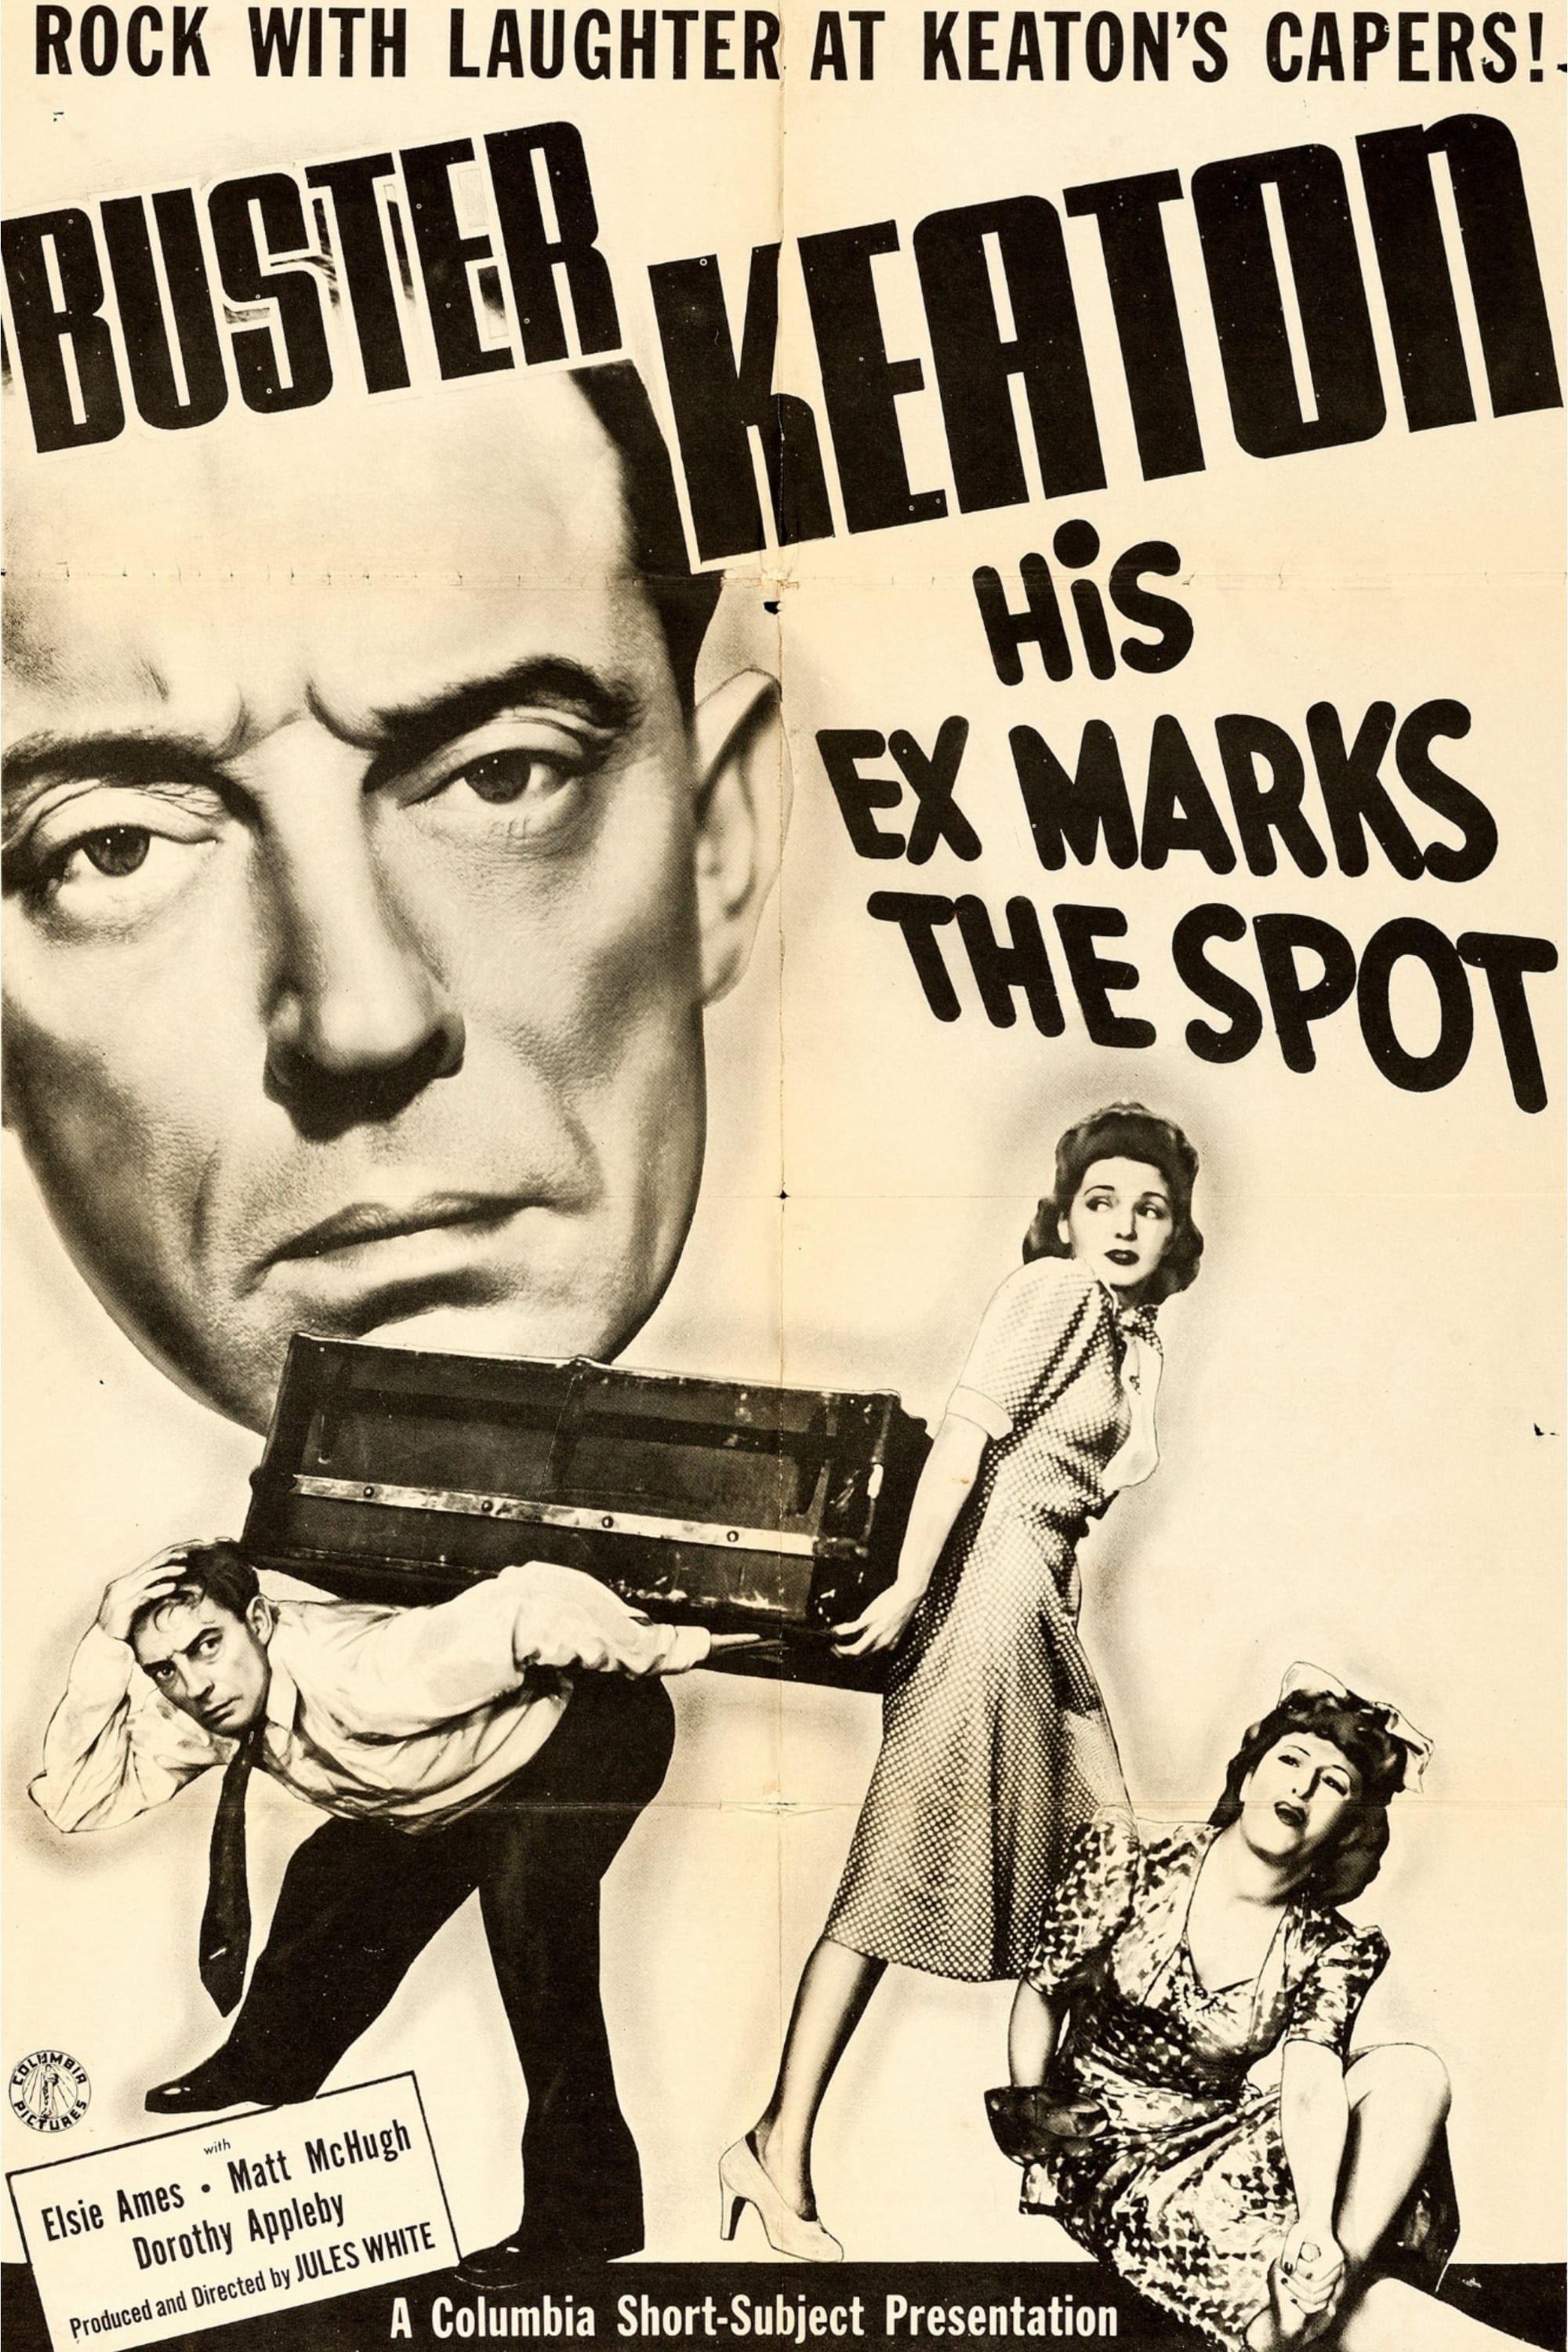 His Ex Marks the Spot (1940)